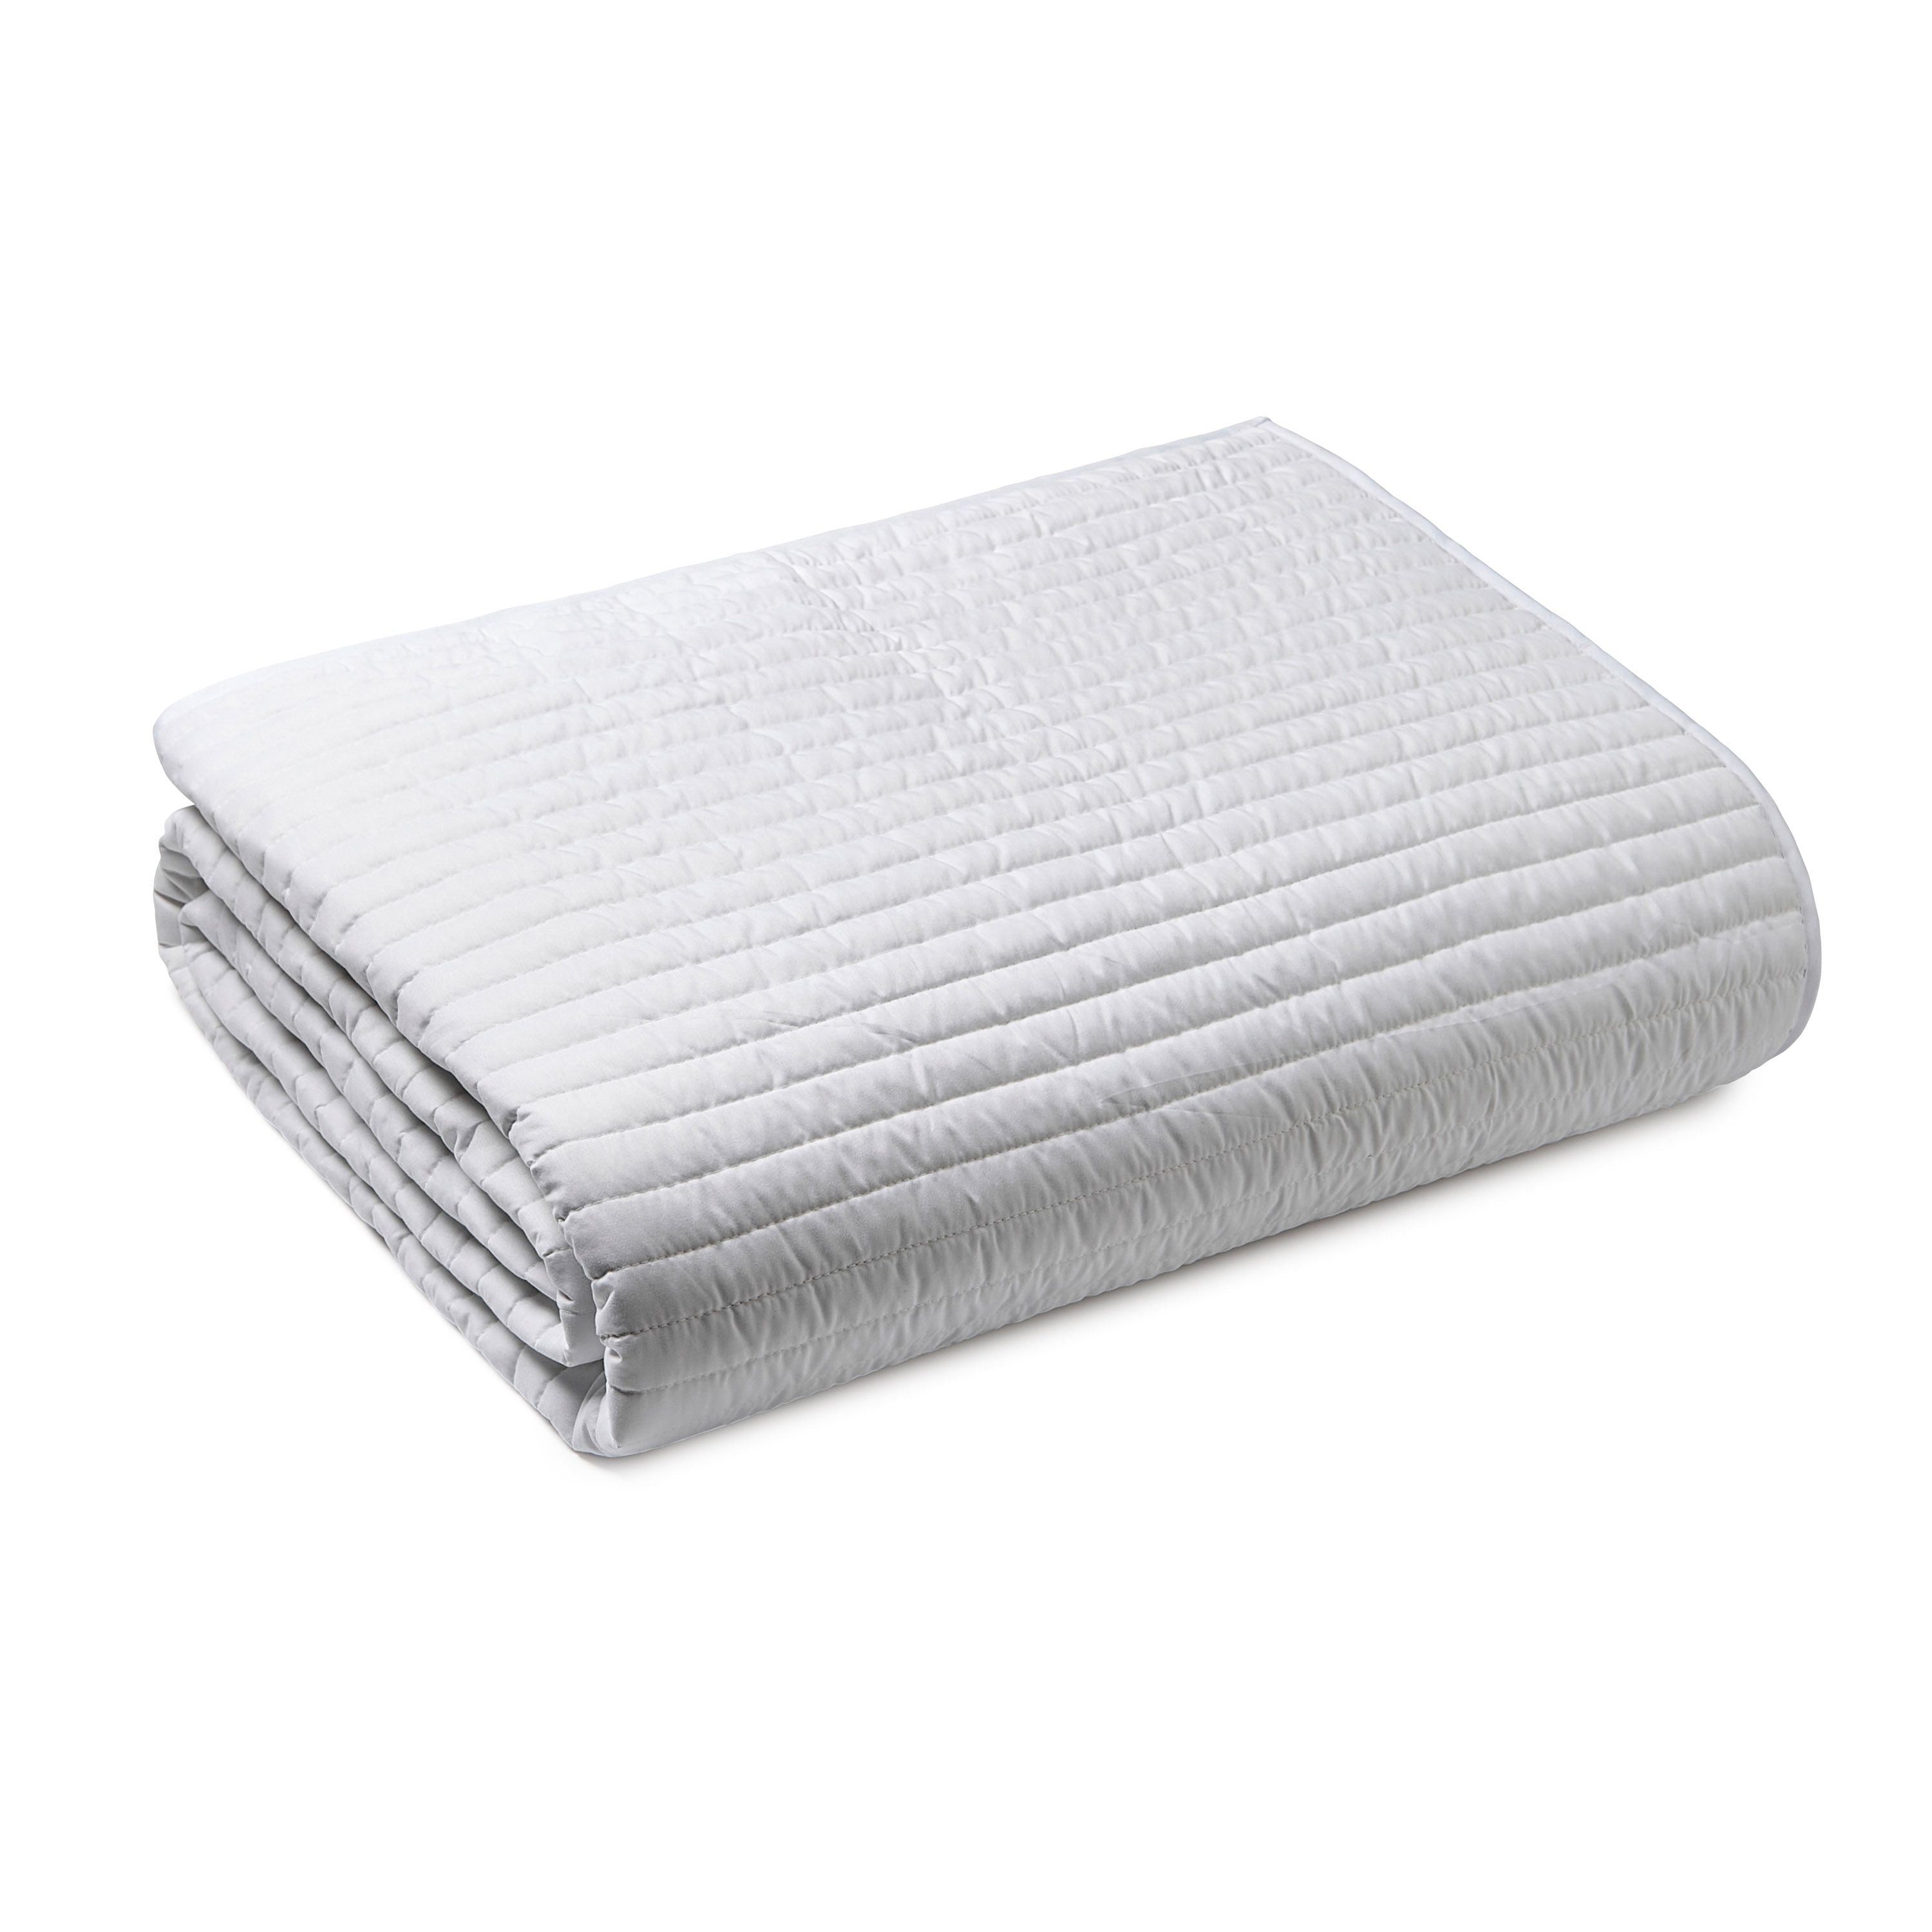 Quilted Lines Bedspread, White